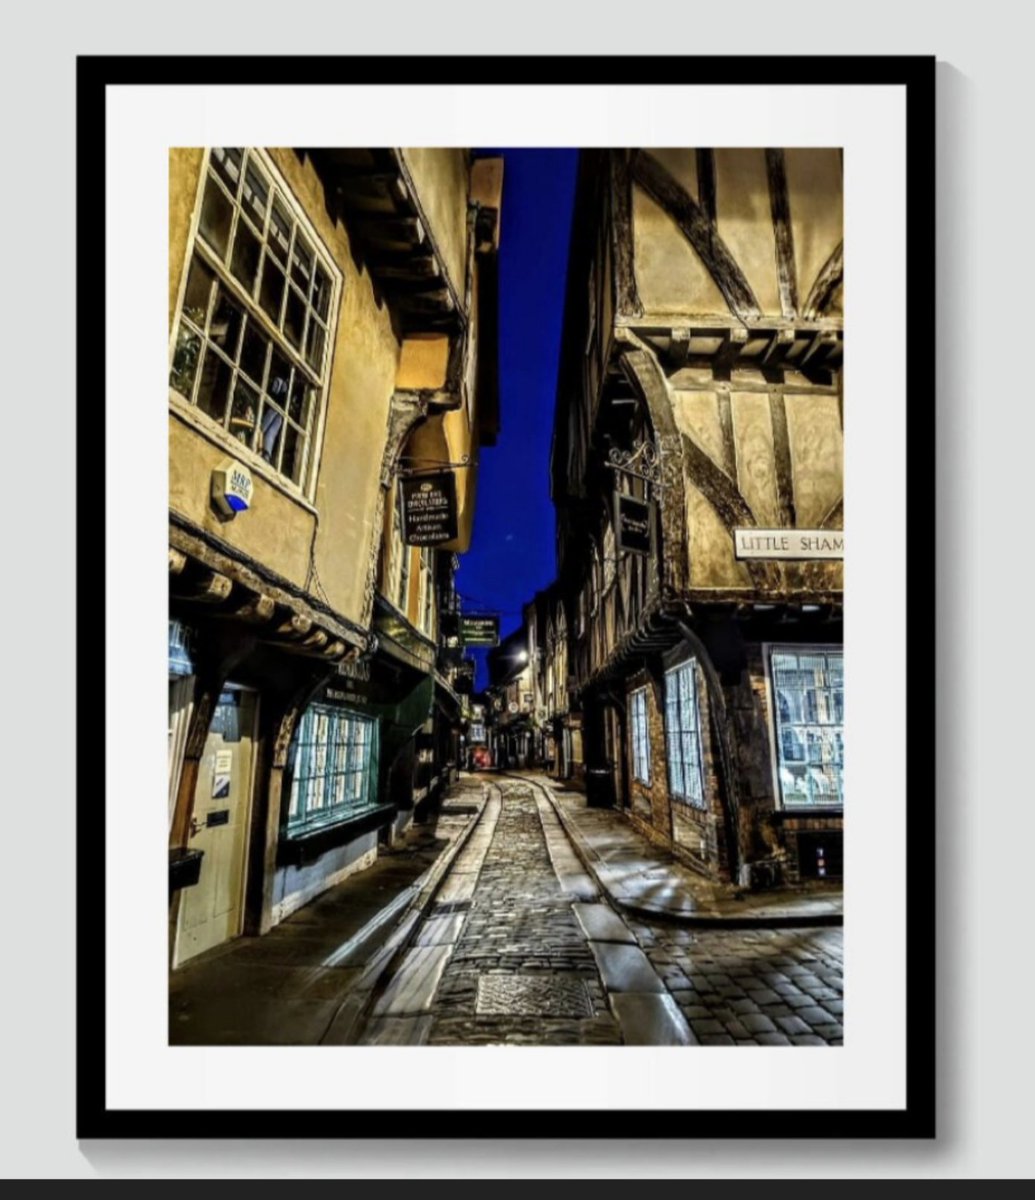 Good morning. It's Friday 🙂 Handcrafted cards and photos available at MoniCaptures. Love cards and a view of one of my favourite streets in England ❤️ Available here etsy.com/uk/shop/MoniCa… #etsyshopuk #photos #homeideas #giftideas #cards